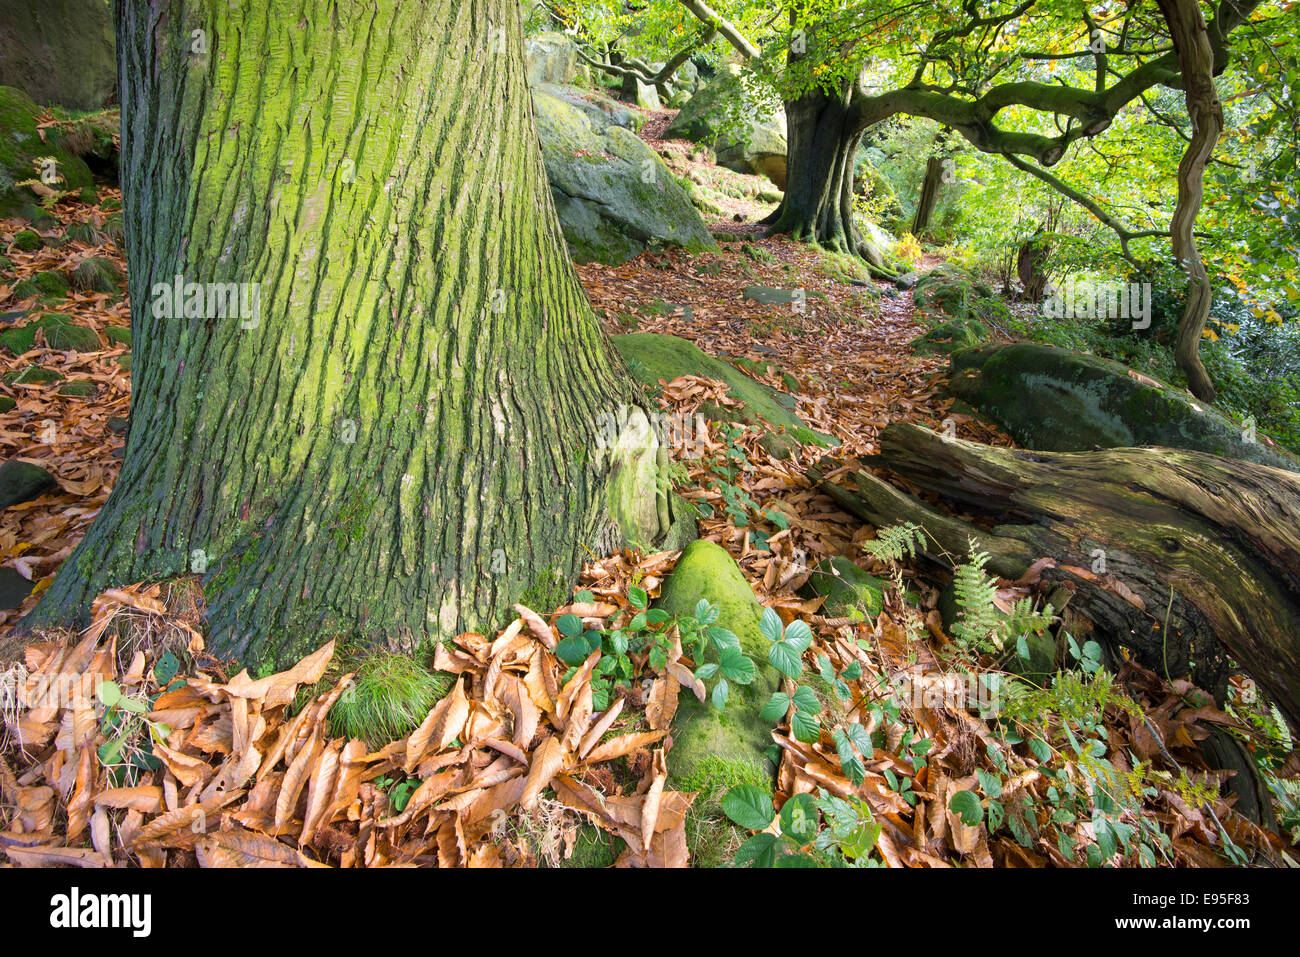 Tree trunk with textured bark. A mature Sweet Chestnut tree near Birchover in the Peak District in autumn. Stock Photo